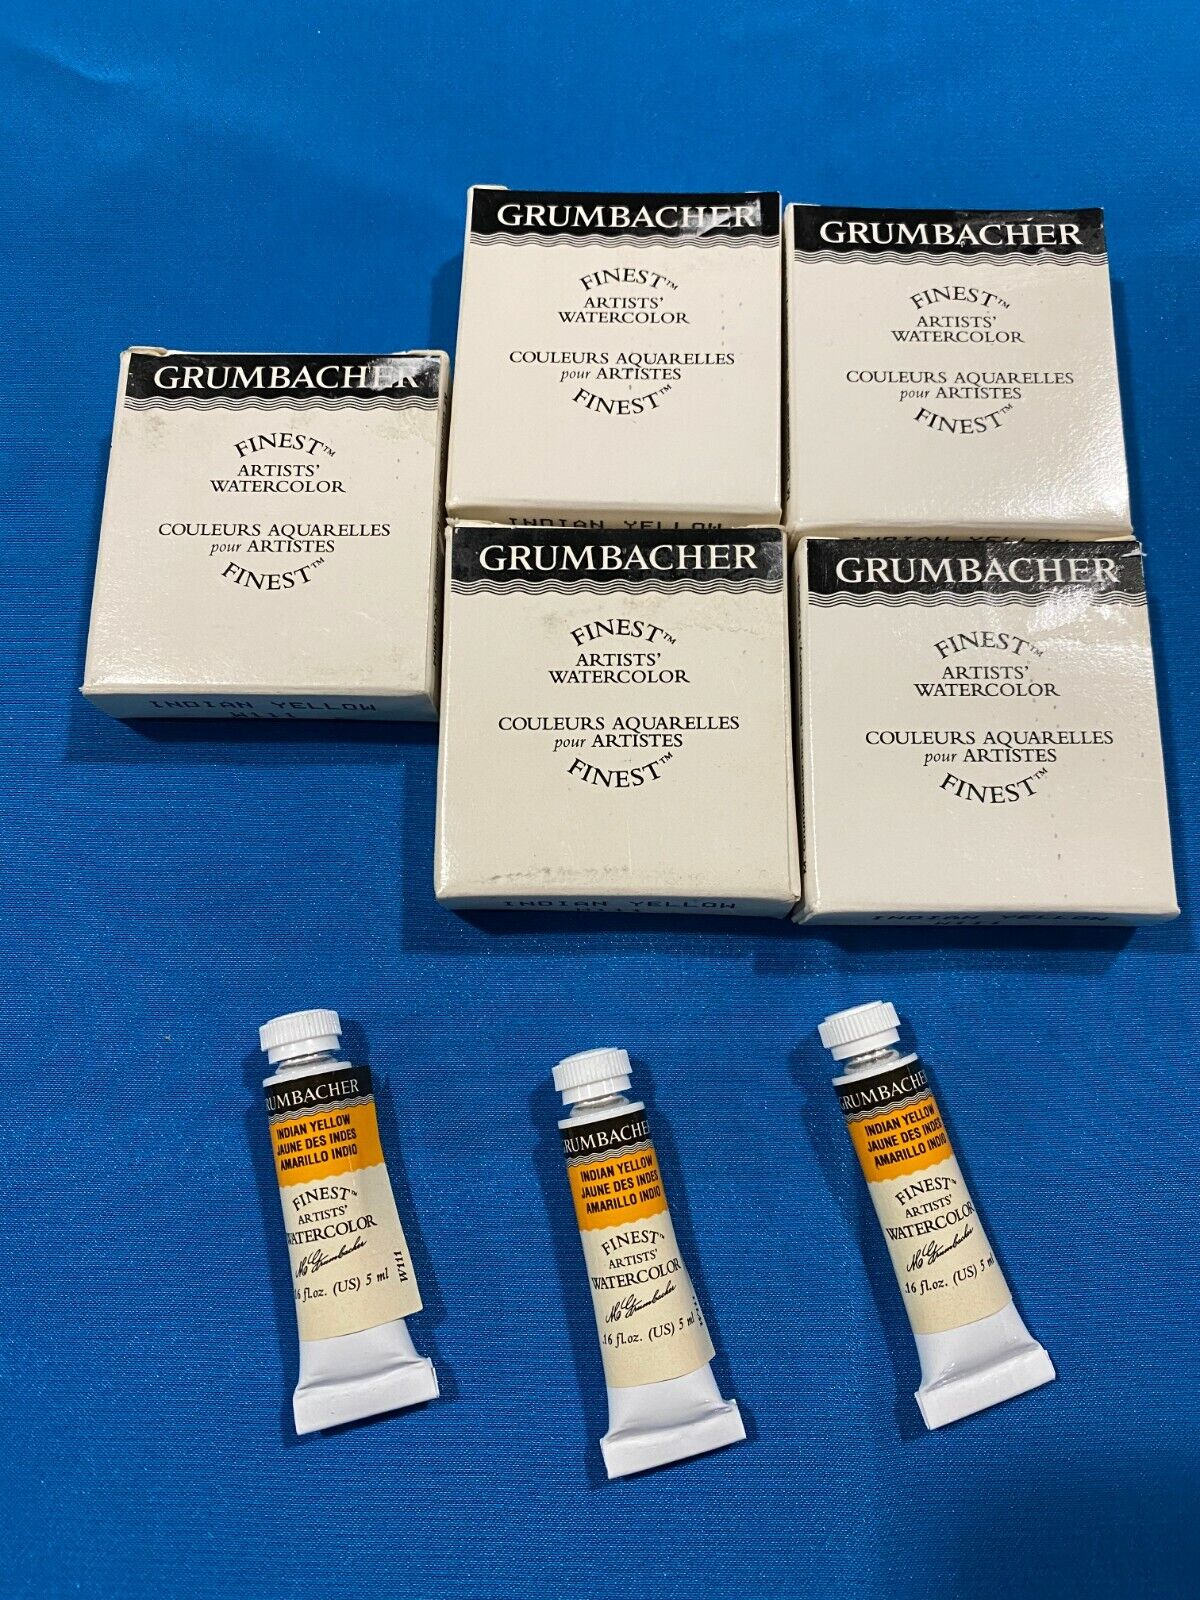 LOT of 15 TUBES VINTAGE GRUMBACHER FINEST ARTISTS WATERCOLOR PAINT INDIAN YELLOW